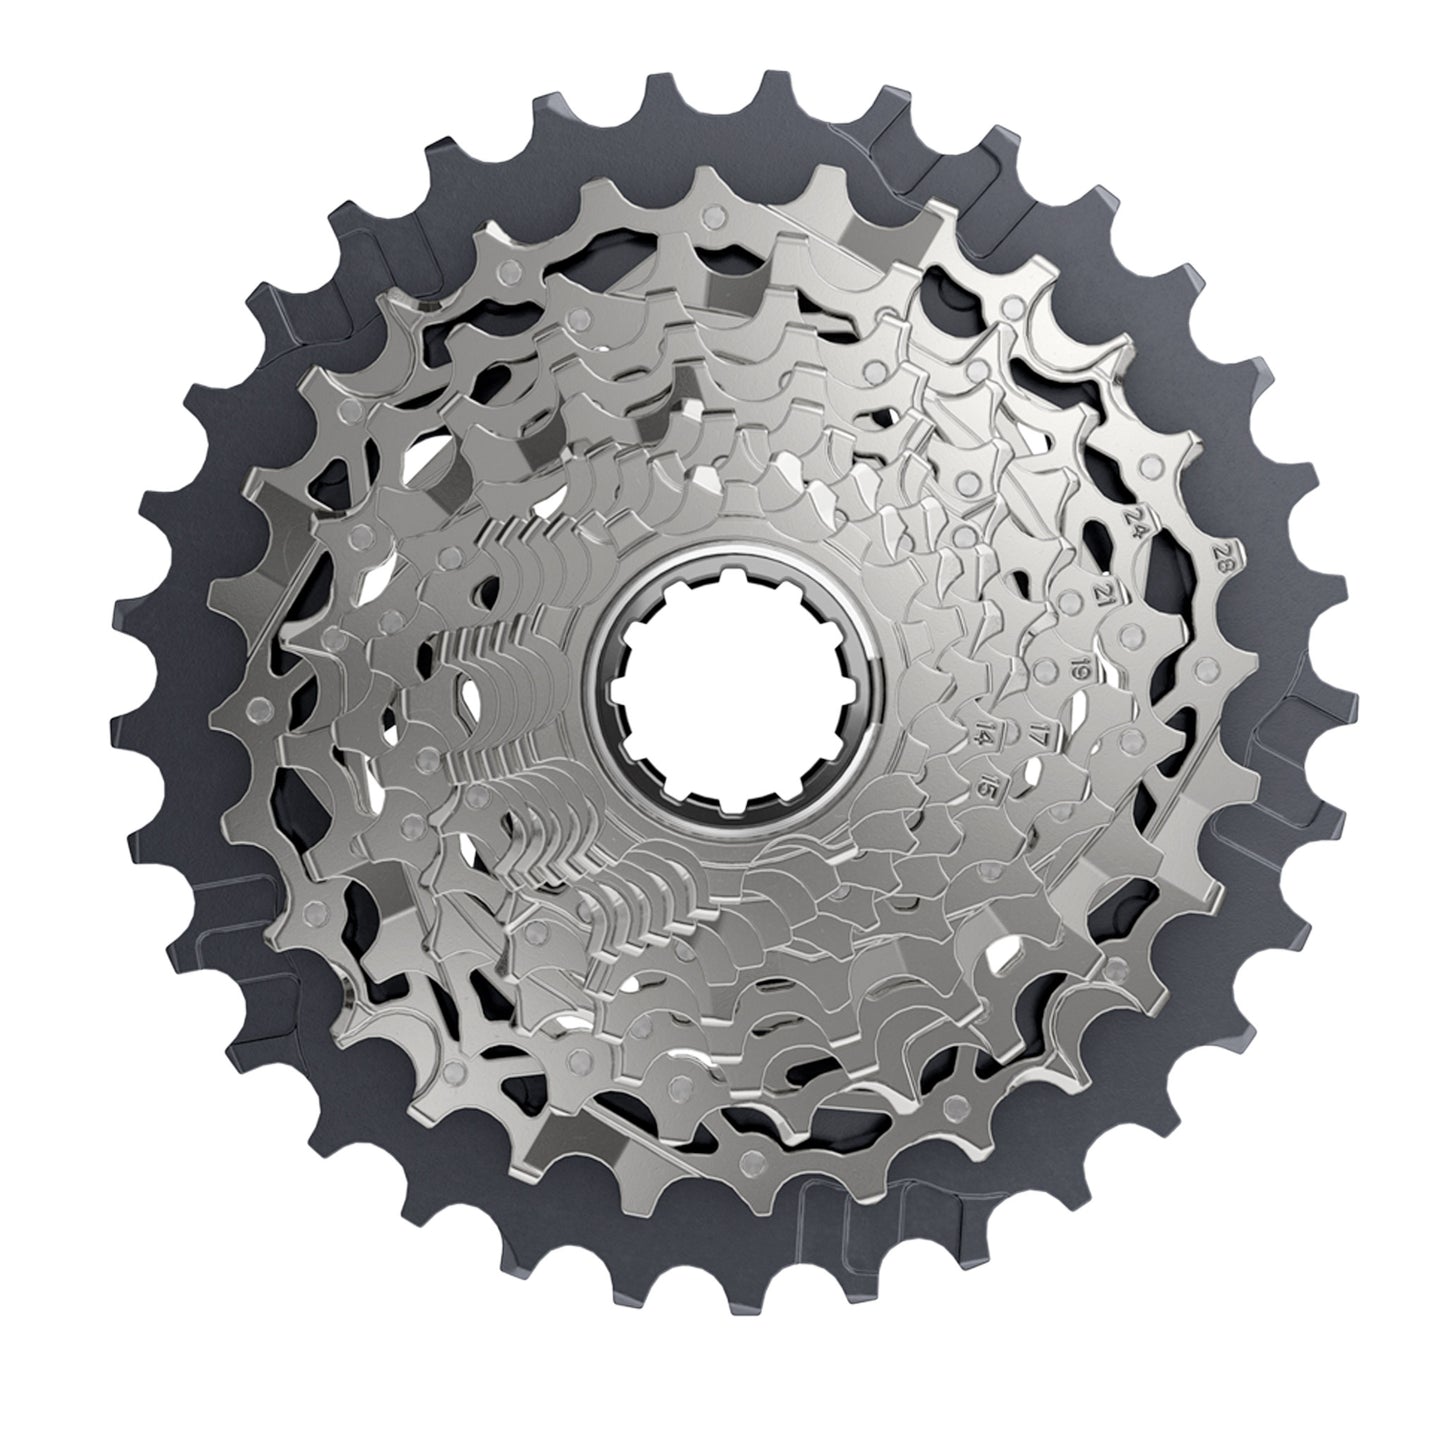 SRAM FORCE XG-1270 D1 10-33T 12 Speed Cassette buy online at Woolys Wheels Sydney with free delivery